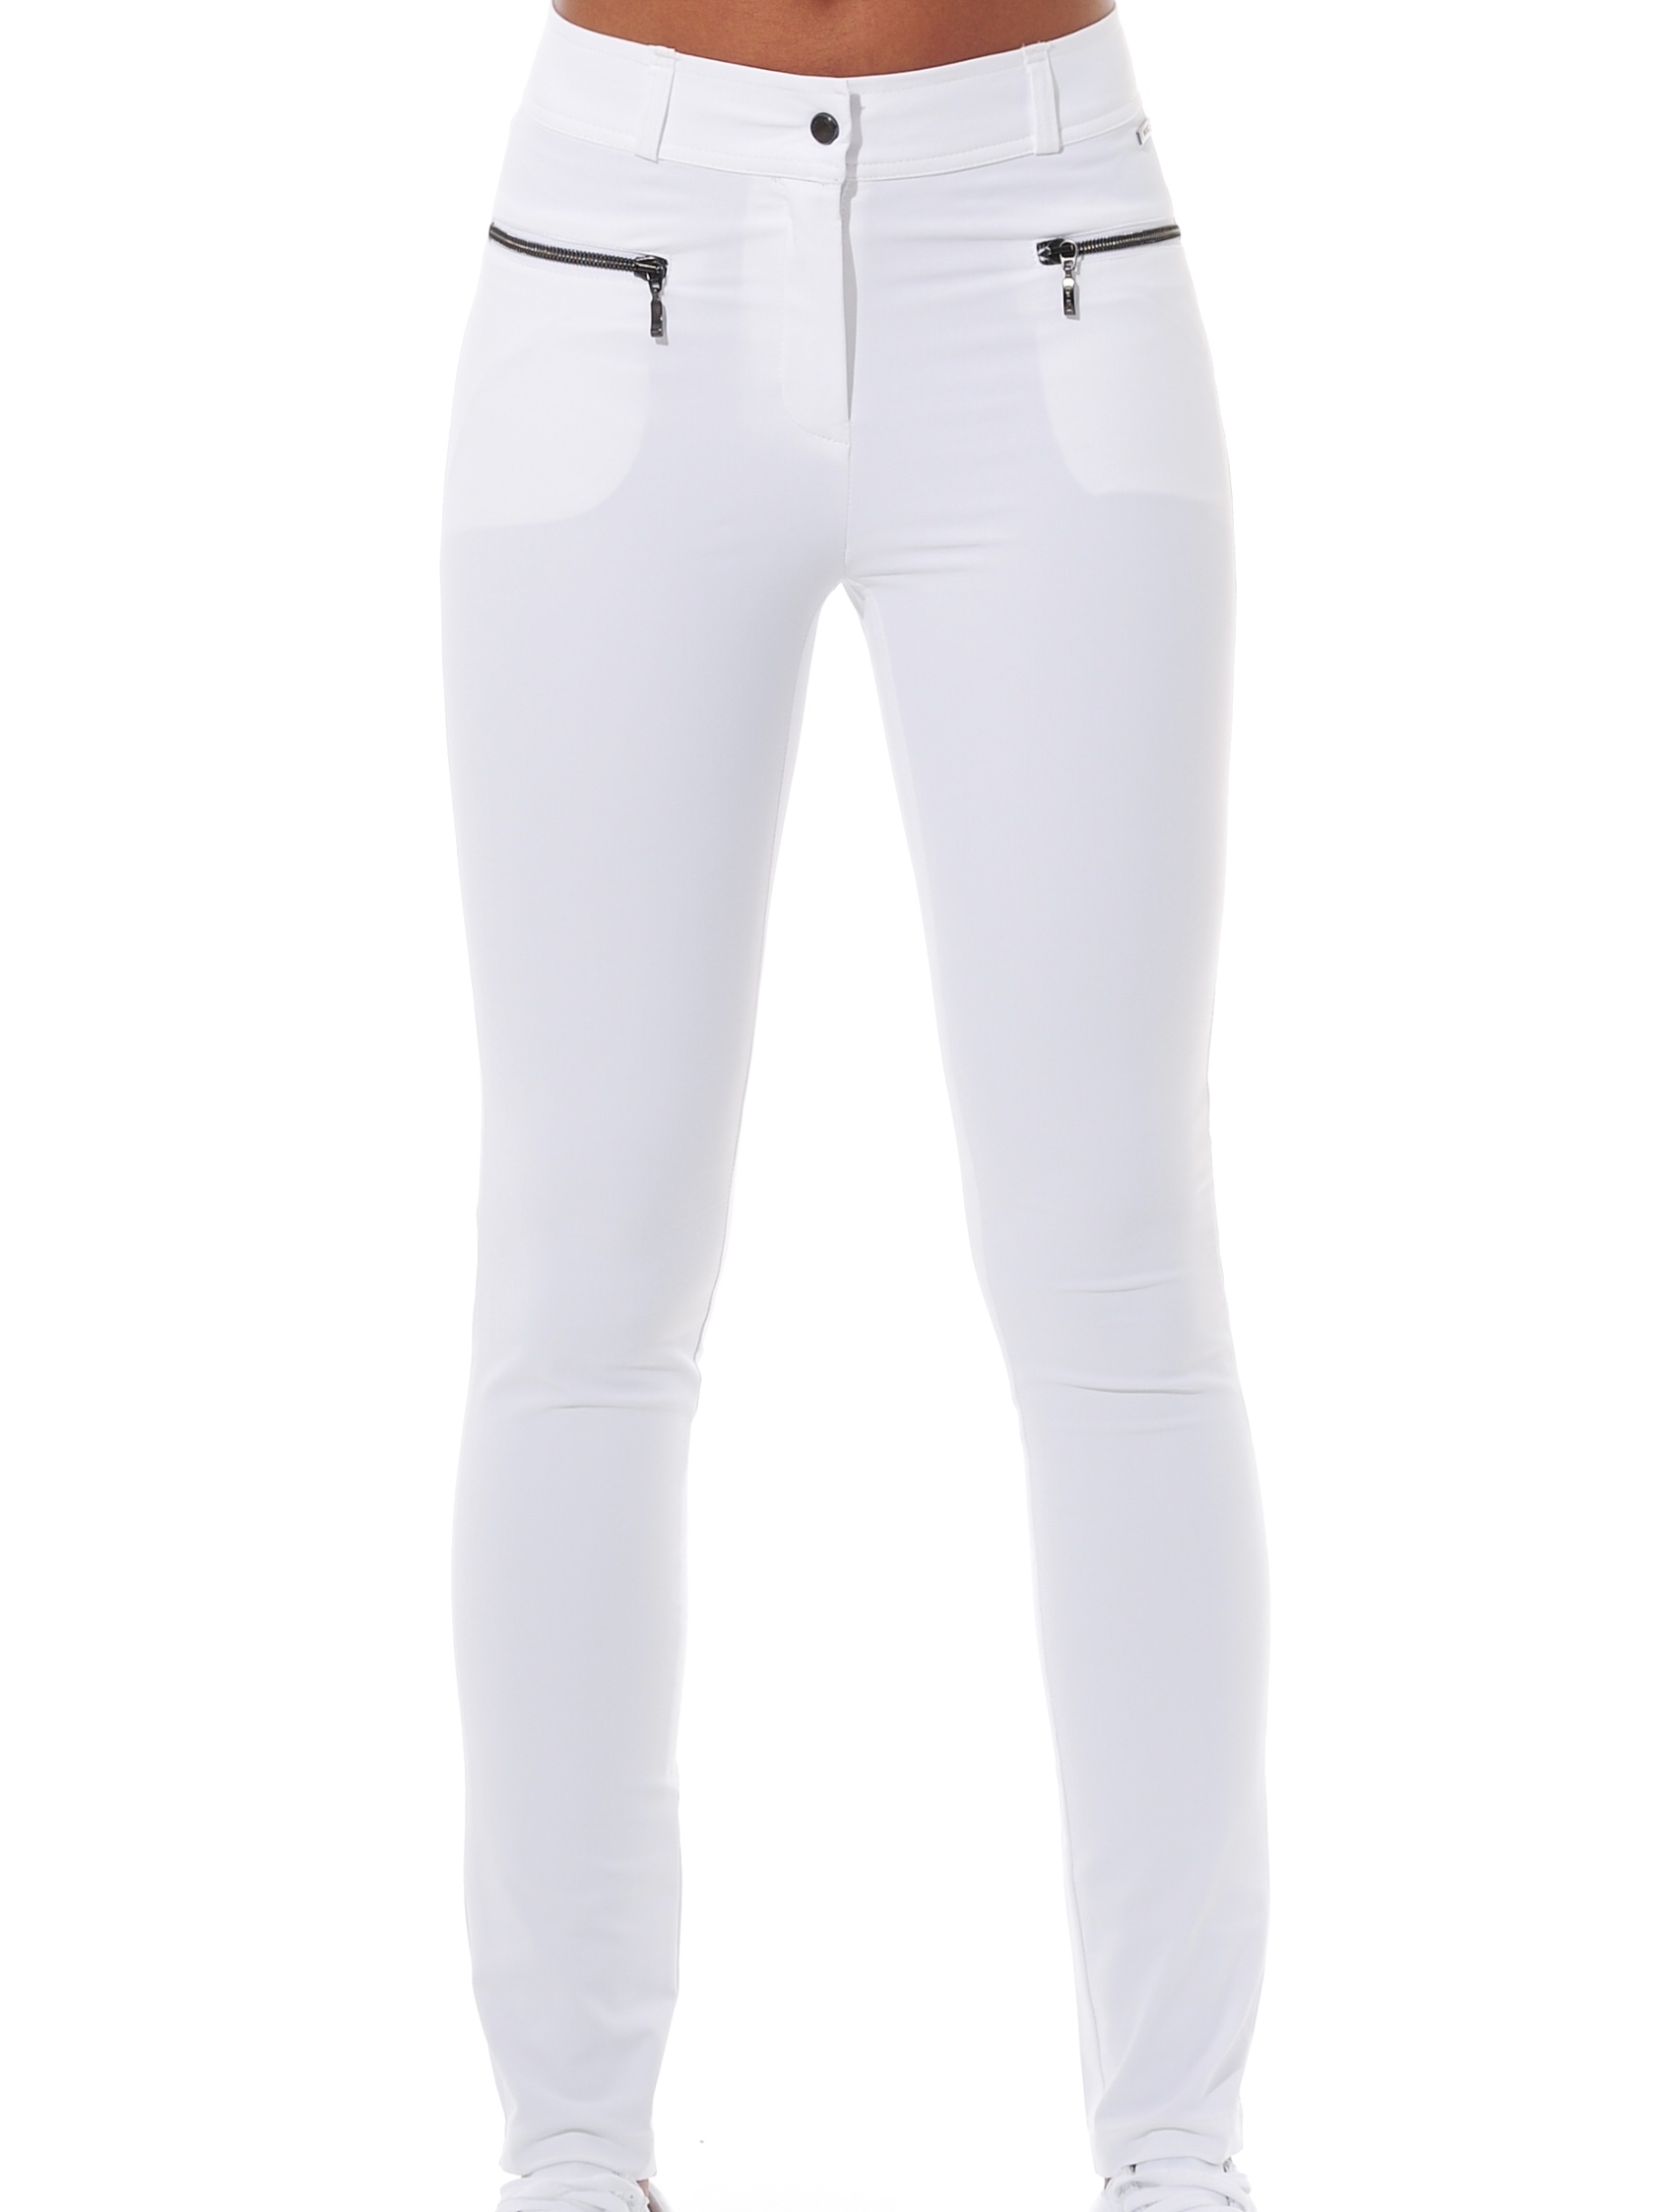 4way stretch jeggings white 